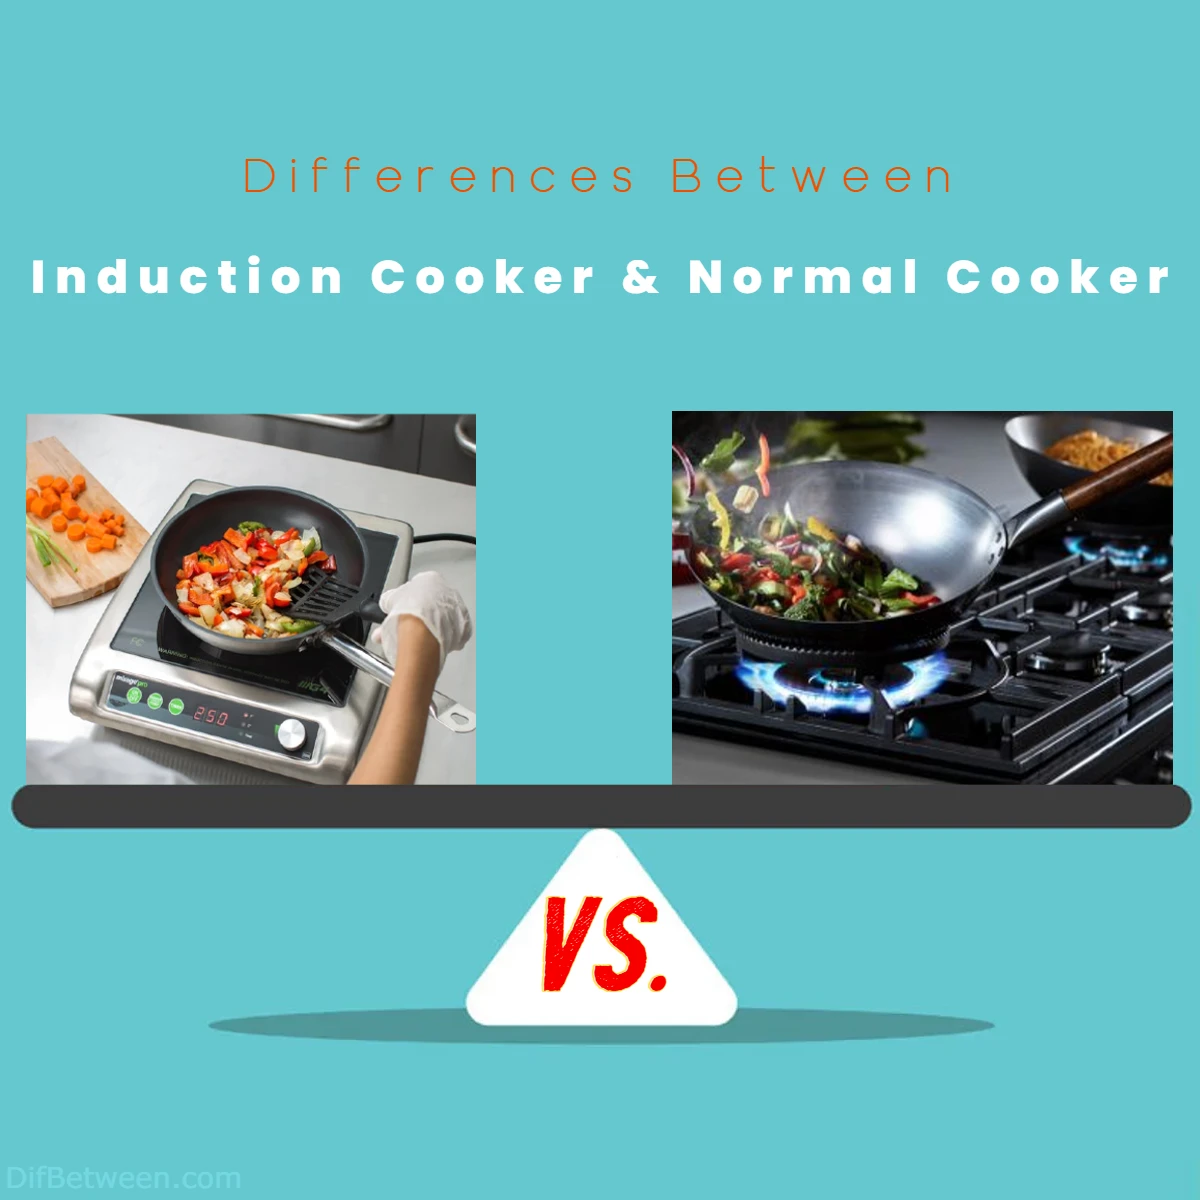 Differences Between Induction Cooker vs Normal Cooker